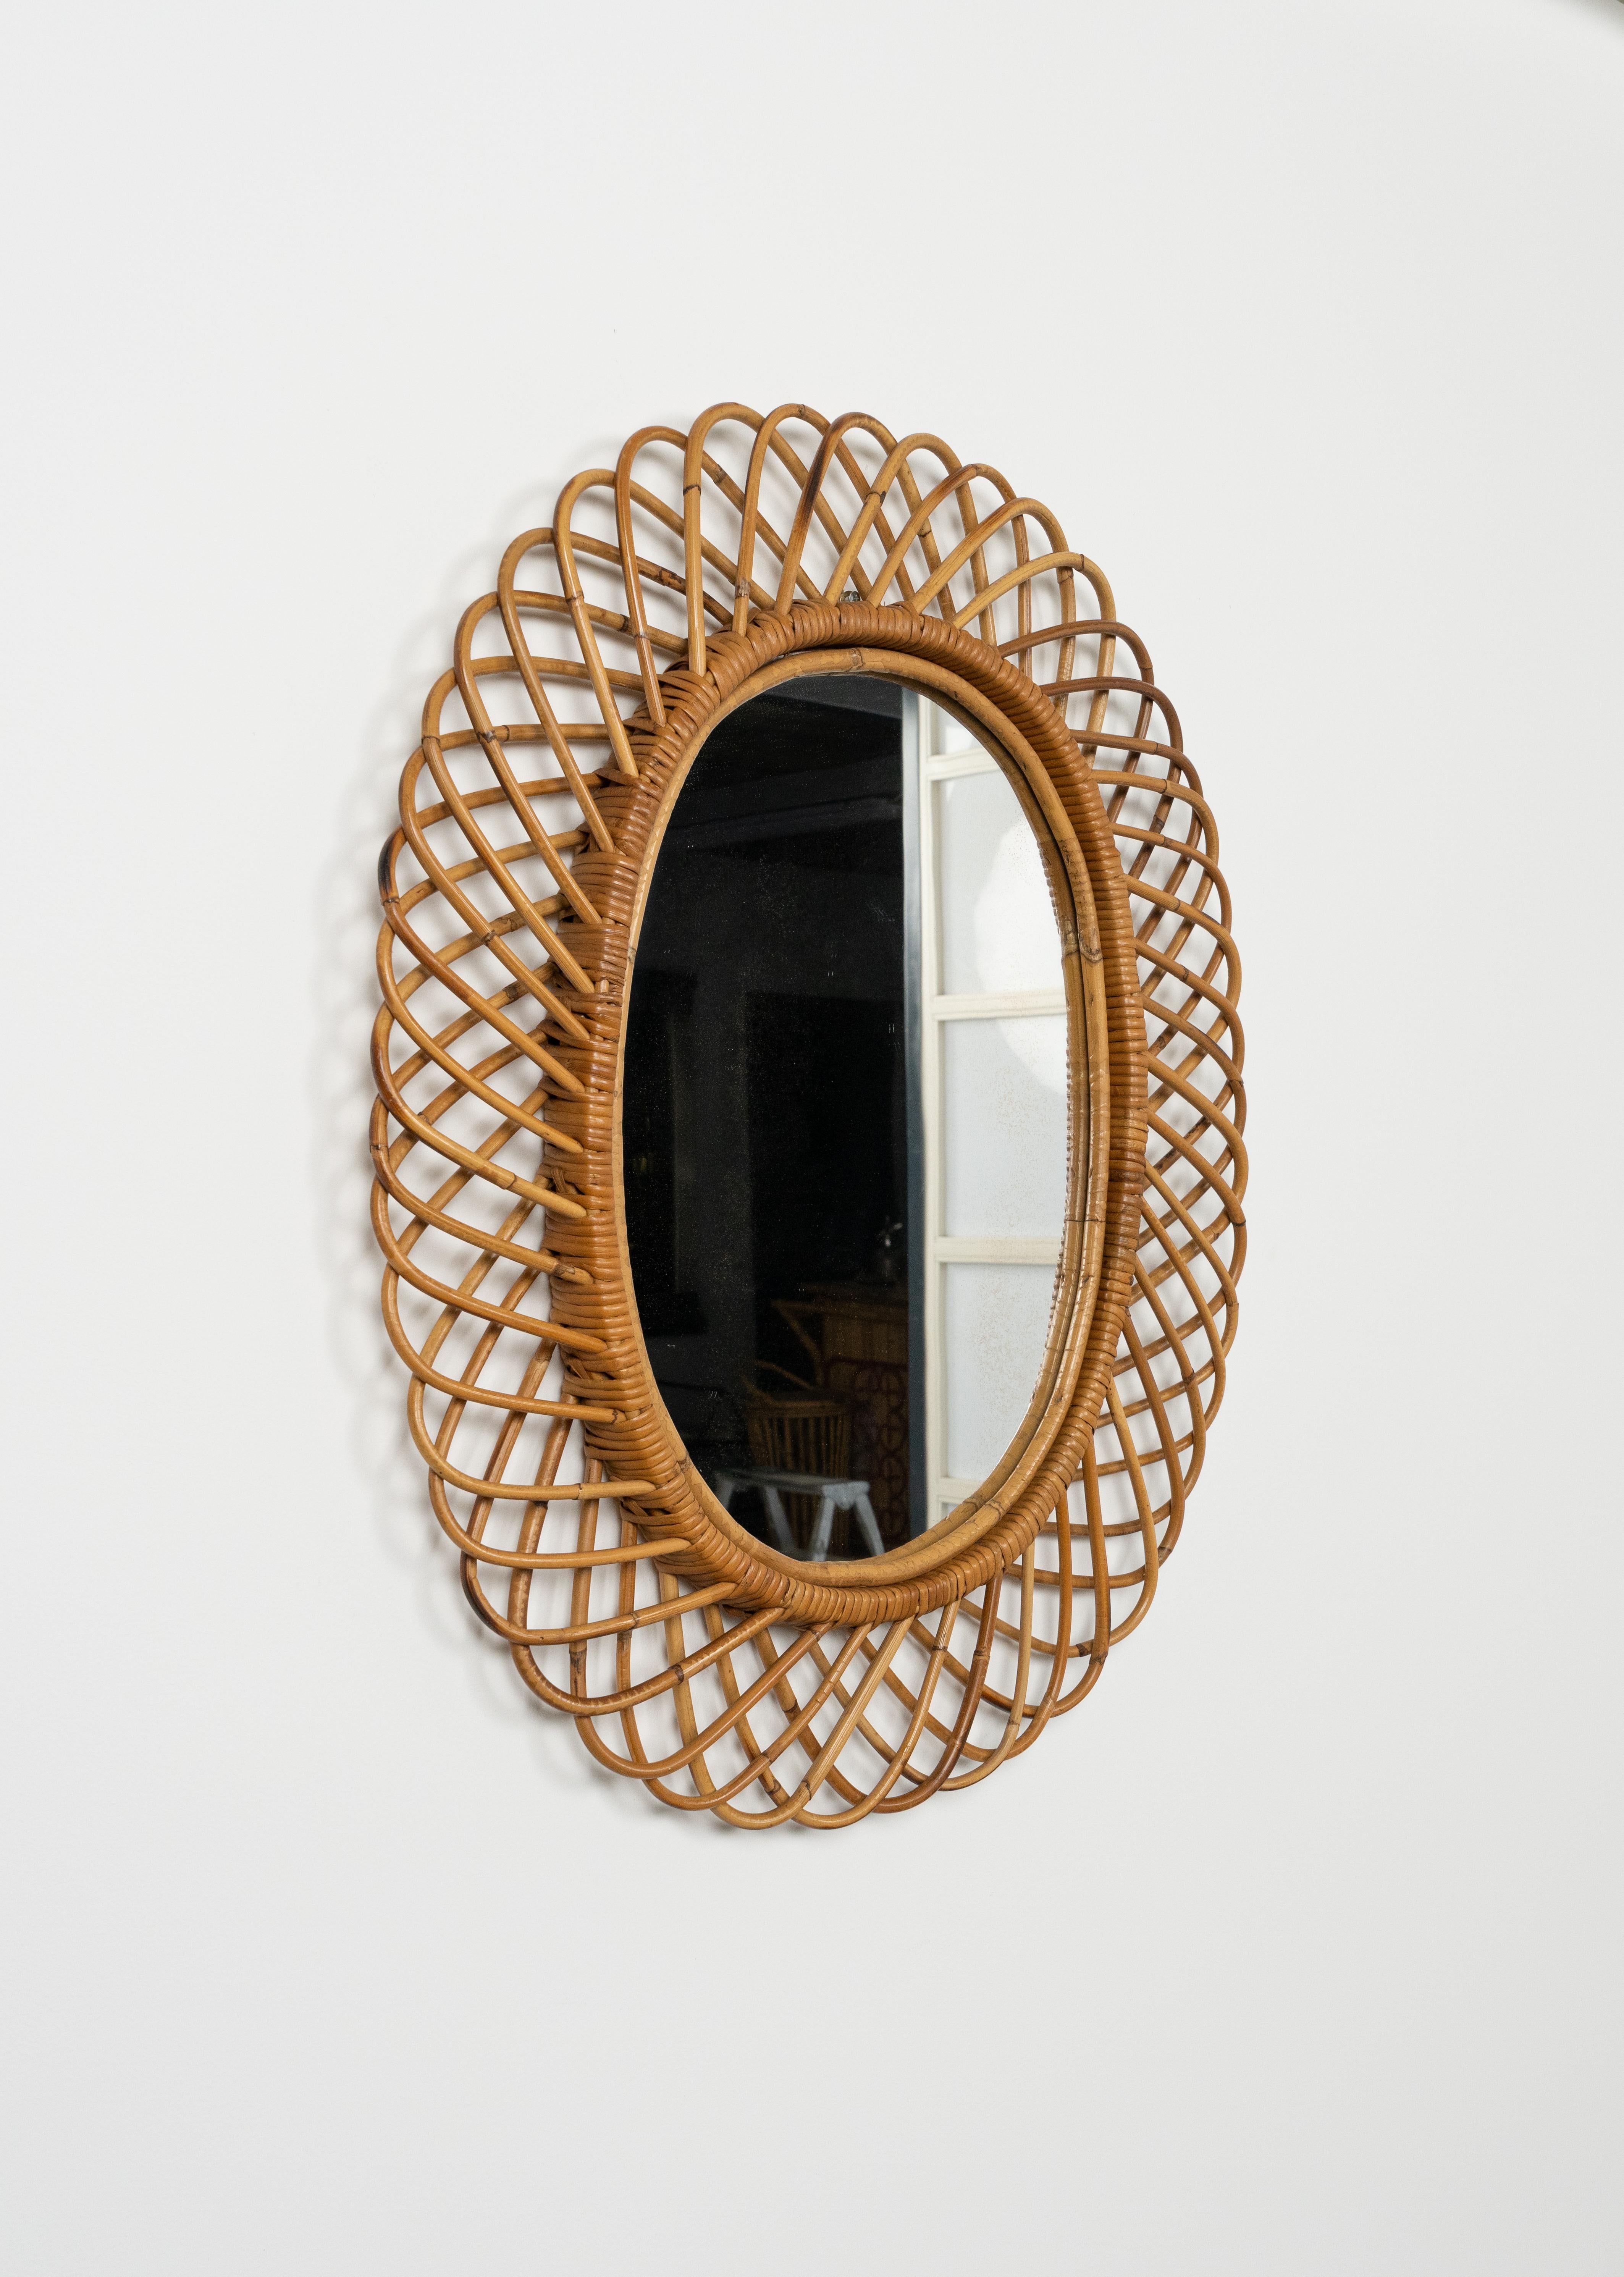 Mid-Century Modern Midcentury Rattan and Bamboo Oval Wall Mirror by Franco Albini, Italy 1960s